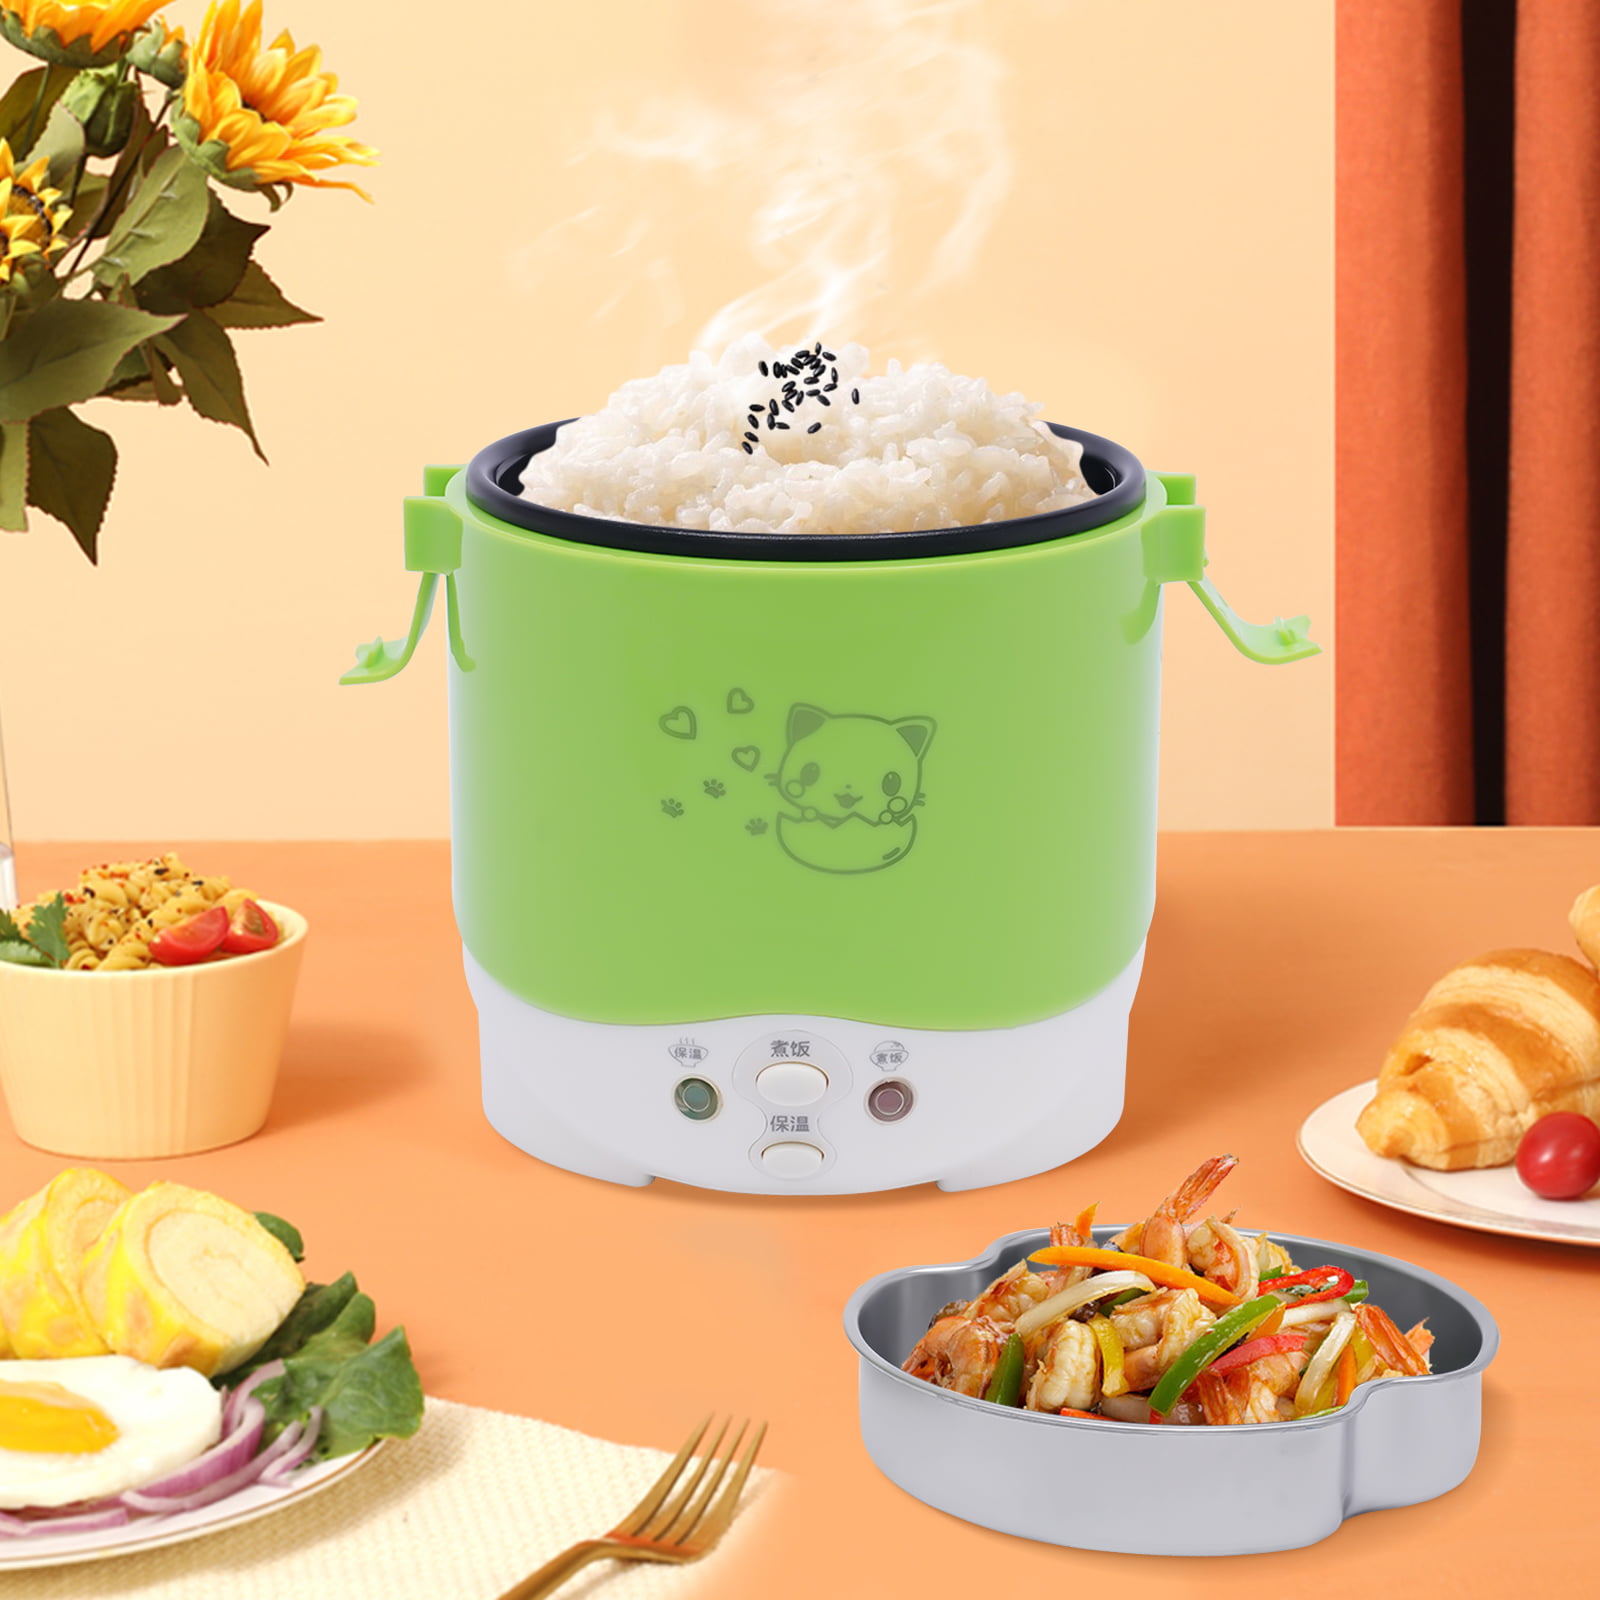 Gupbes Multi-Function (Cooking, Heating, Keeping warm) Mini Travel Rice  Cooker 12V 100W 1L For Car (12v white) 